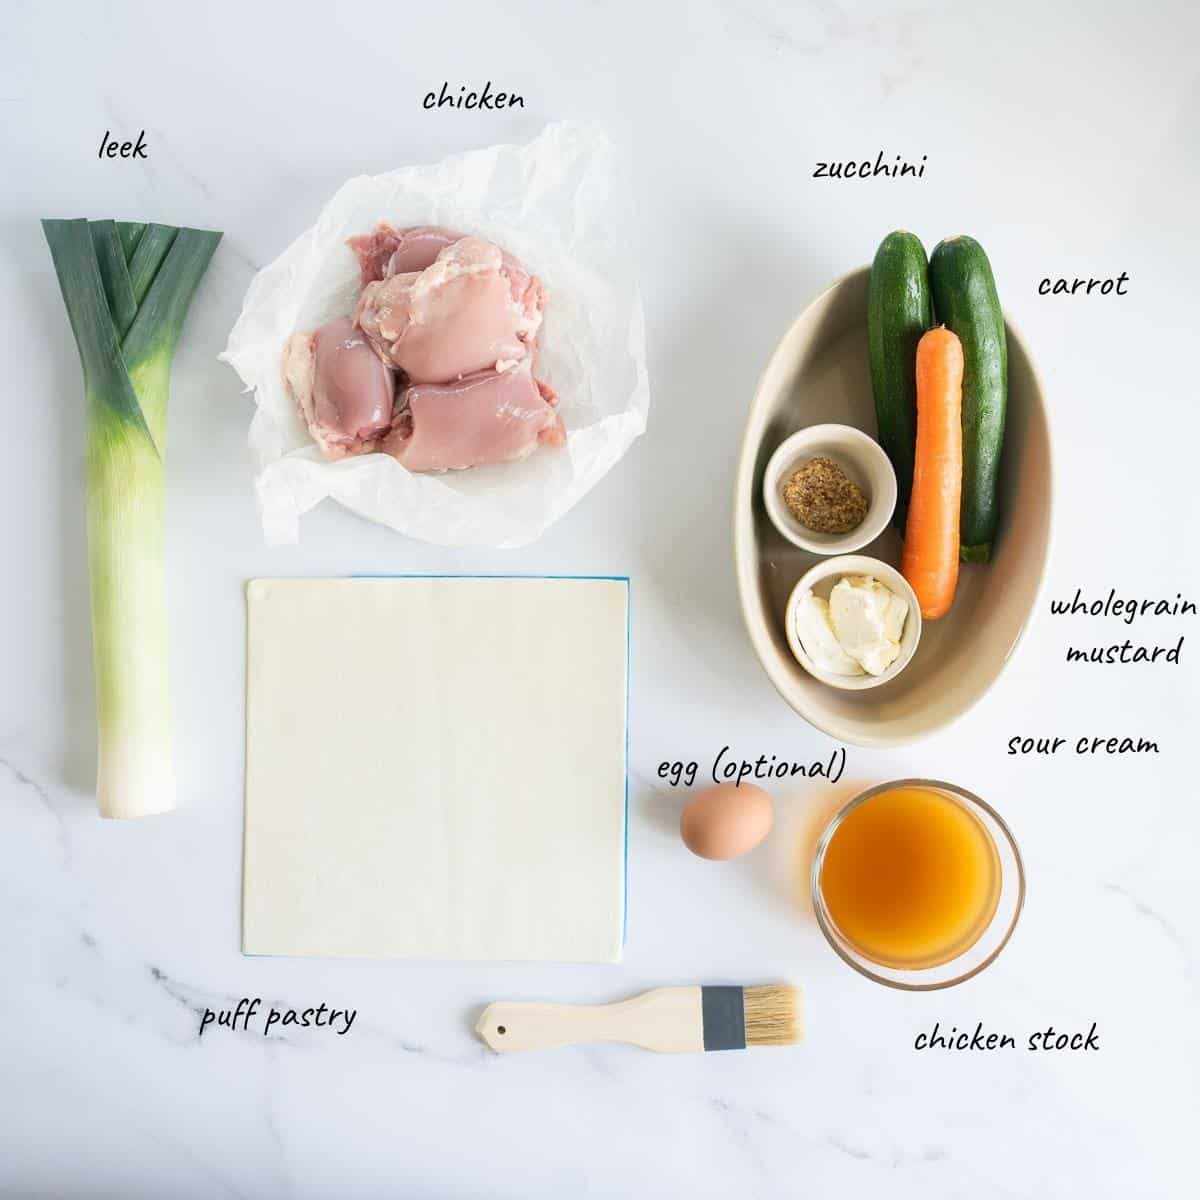 The ingredients to make chicken leek pie laid out on a bench top with text overlay.